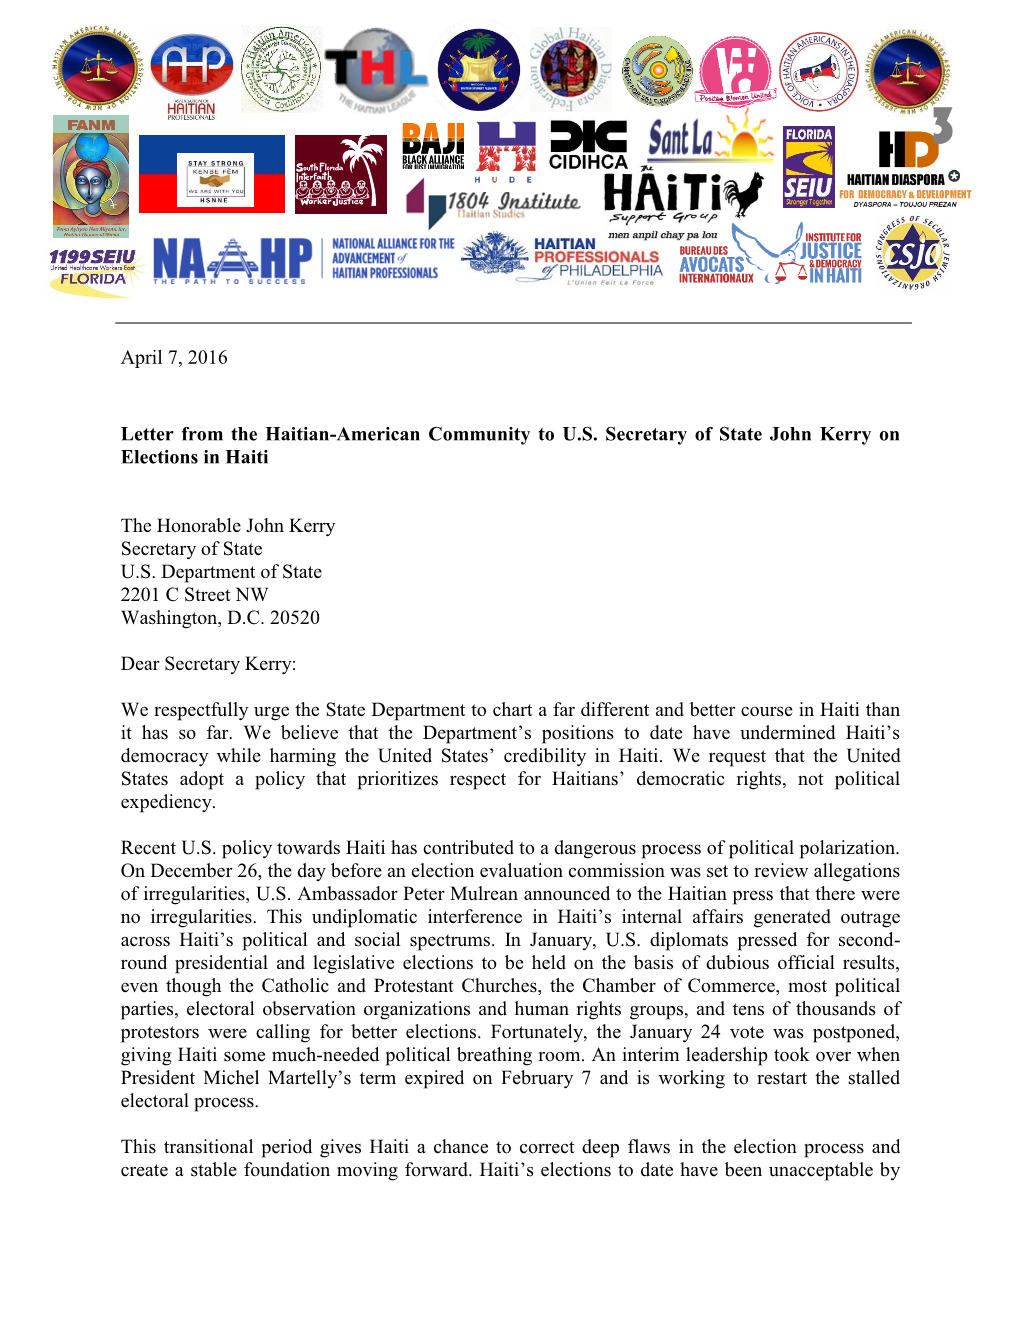 Letter from the Haitian-American Community to U.S. Secretary of State John Kerry on Elections in Haiti